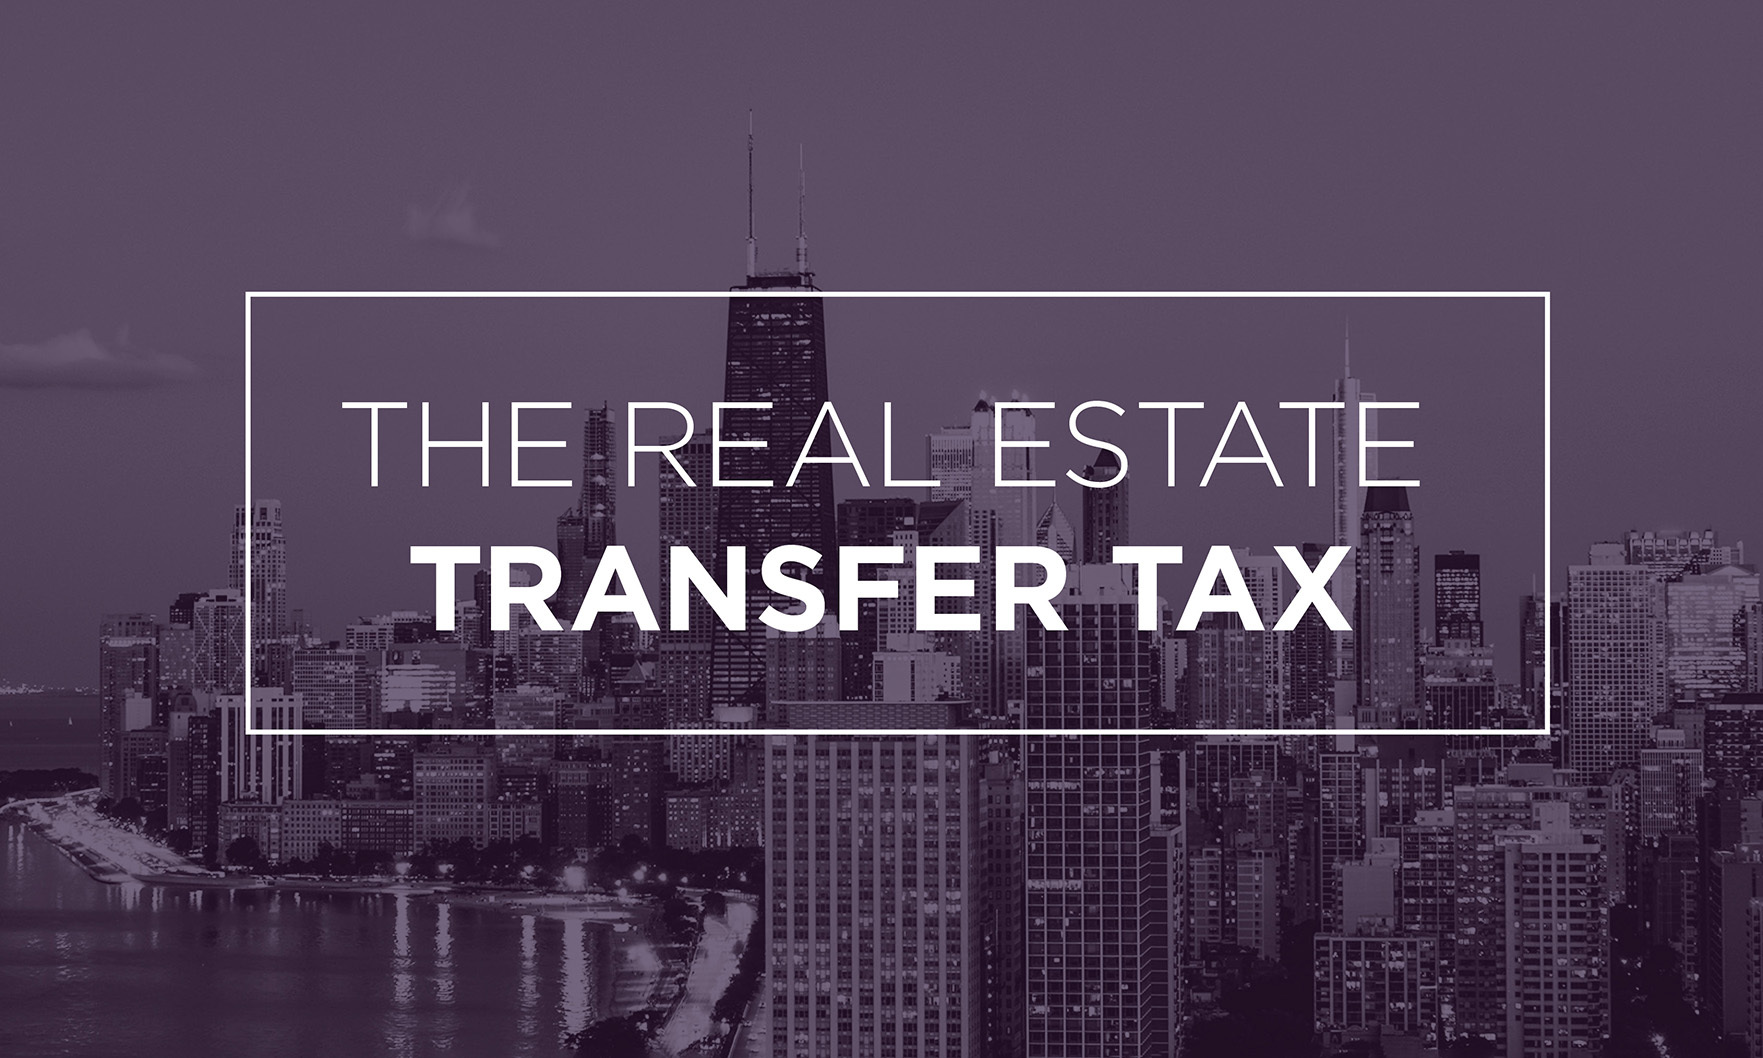 Chicago Alderman Stopped Real Estate Transfer Tax Hike